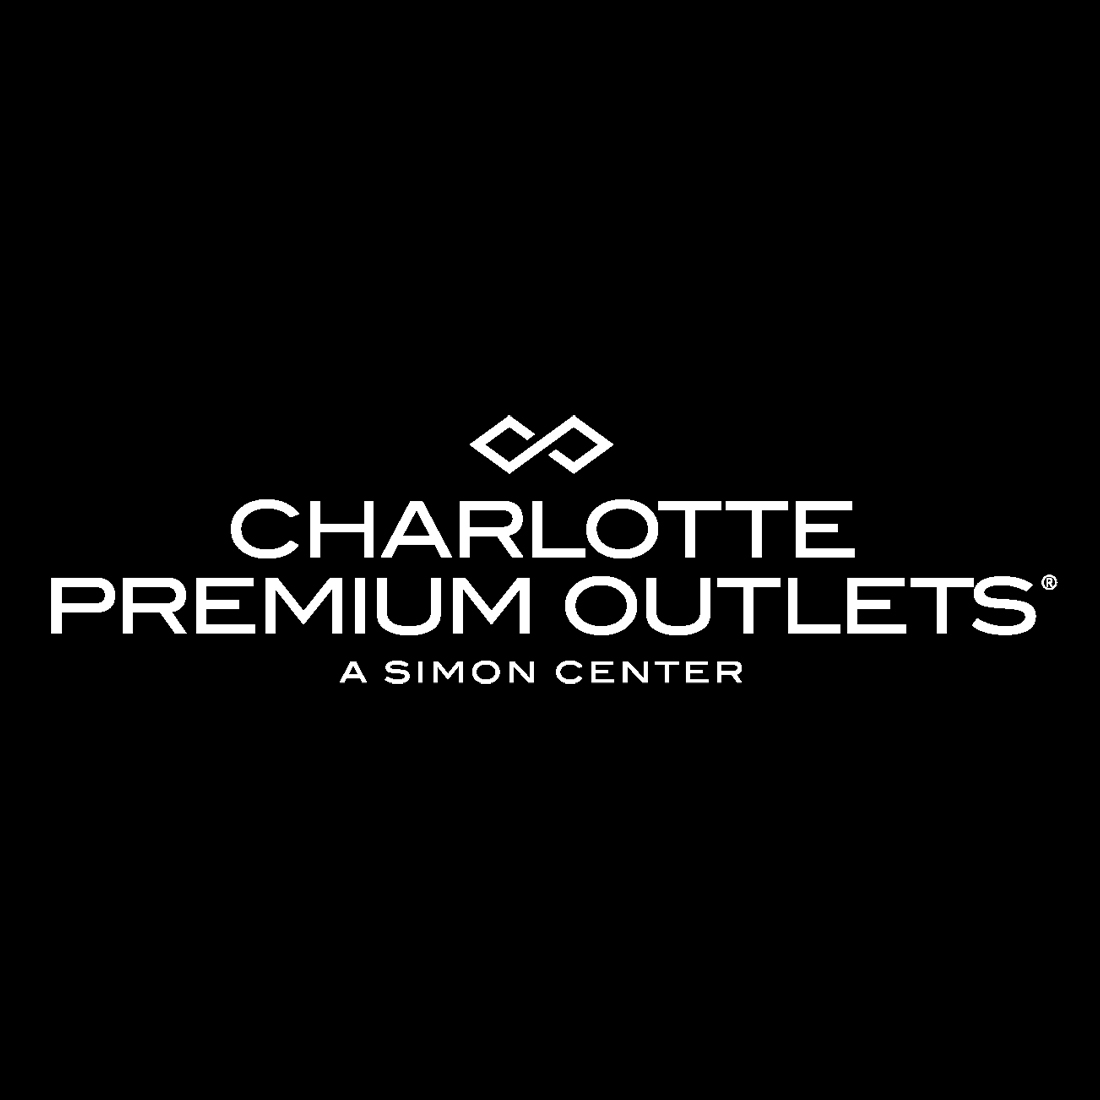 Charlotte Premium Outlets, 5404 New Fashion Way, Charlotte, NC - MapQuest